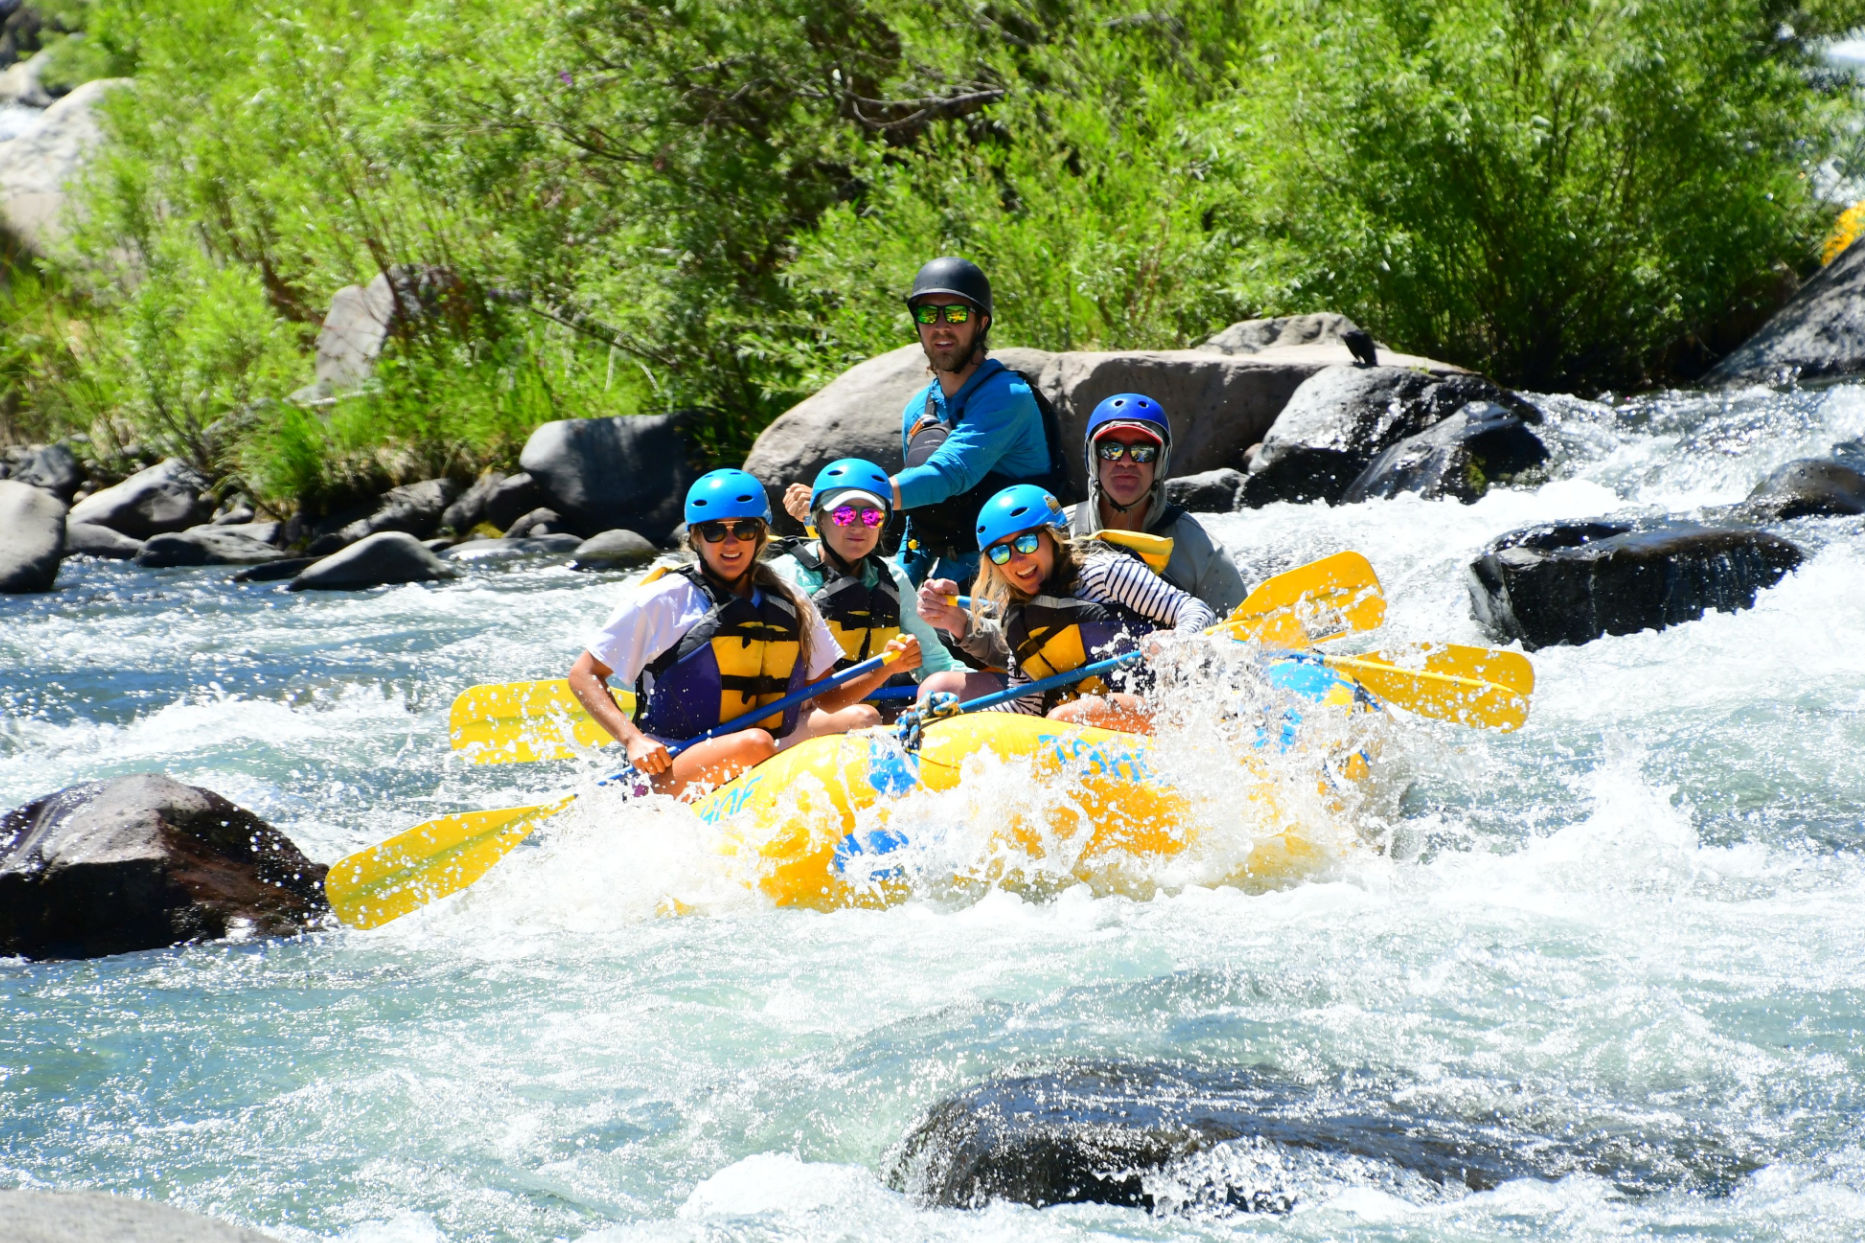 Truckee River Rafting Is Wide Open for Summer With ‘Epic’ Conditions